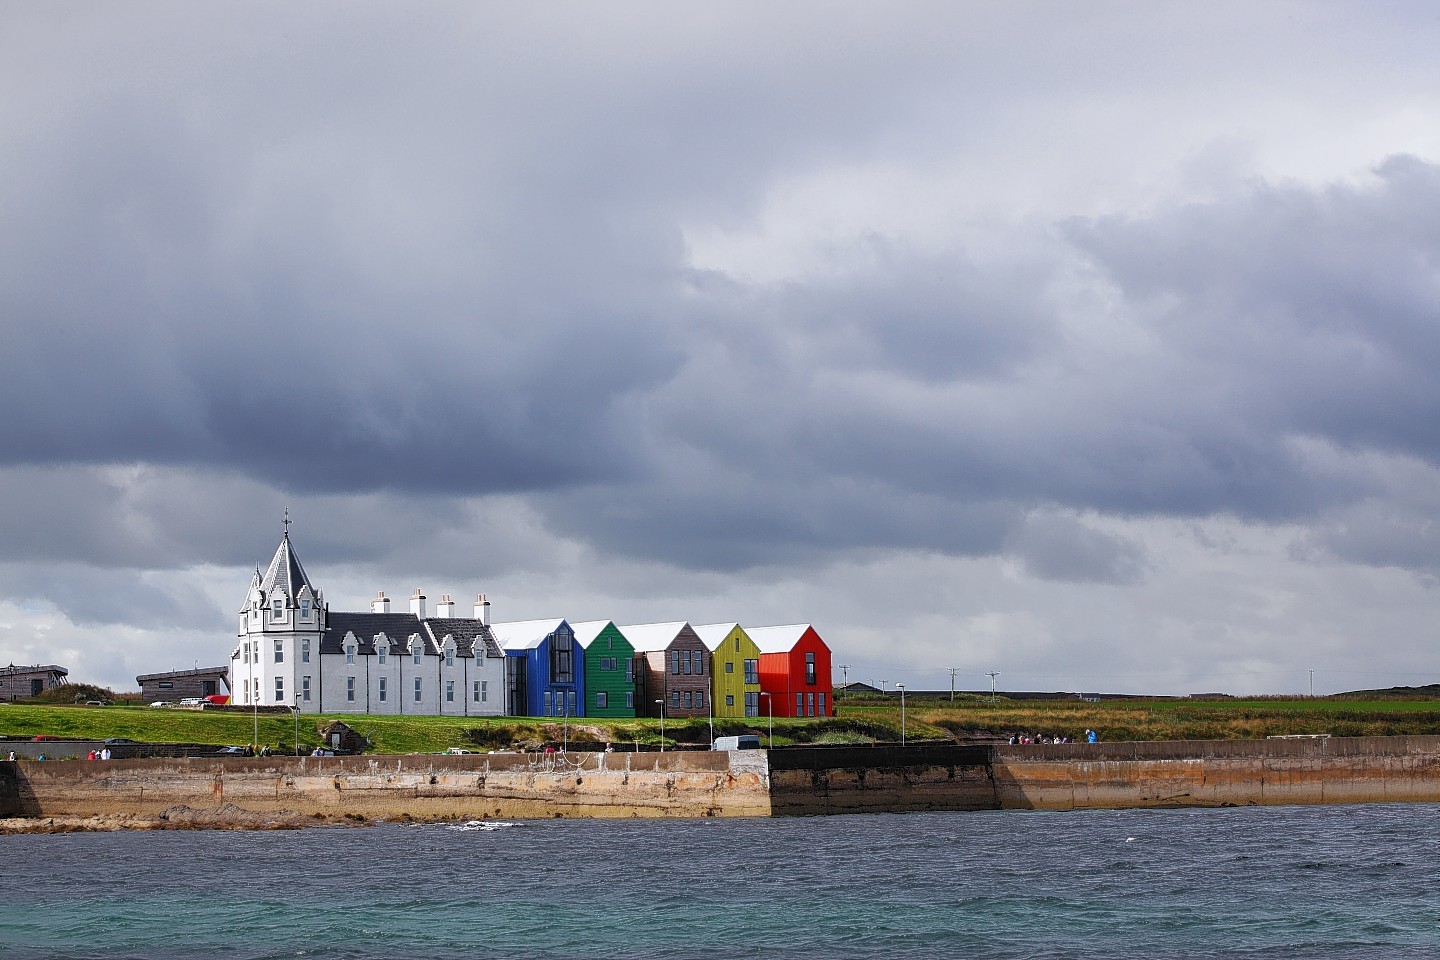 The plans for John O’Groats have been drawn up by Natural Retreats, which has already refurbished the John O’Groats Hotel.